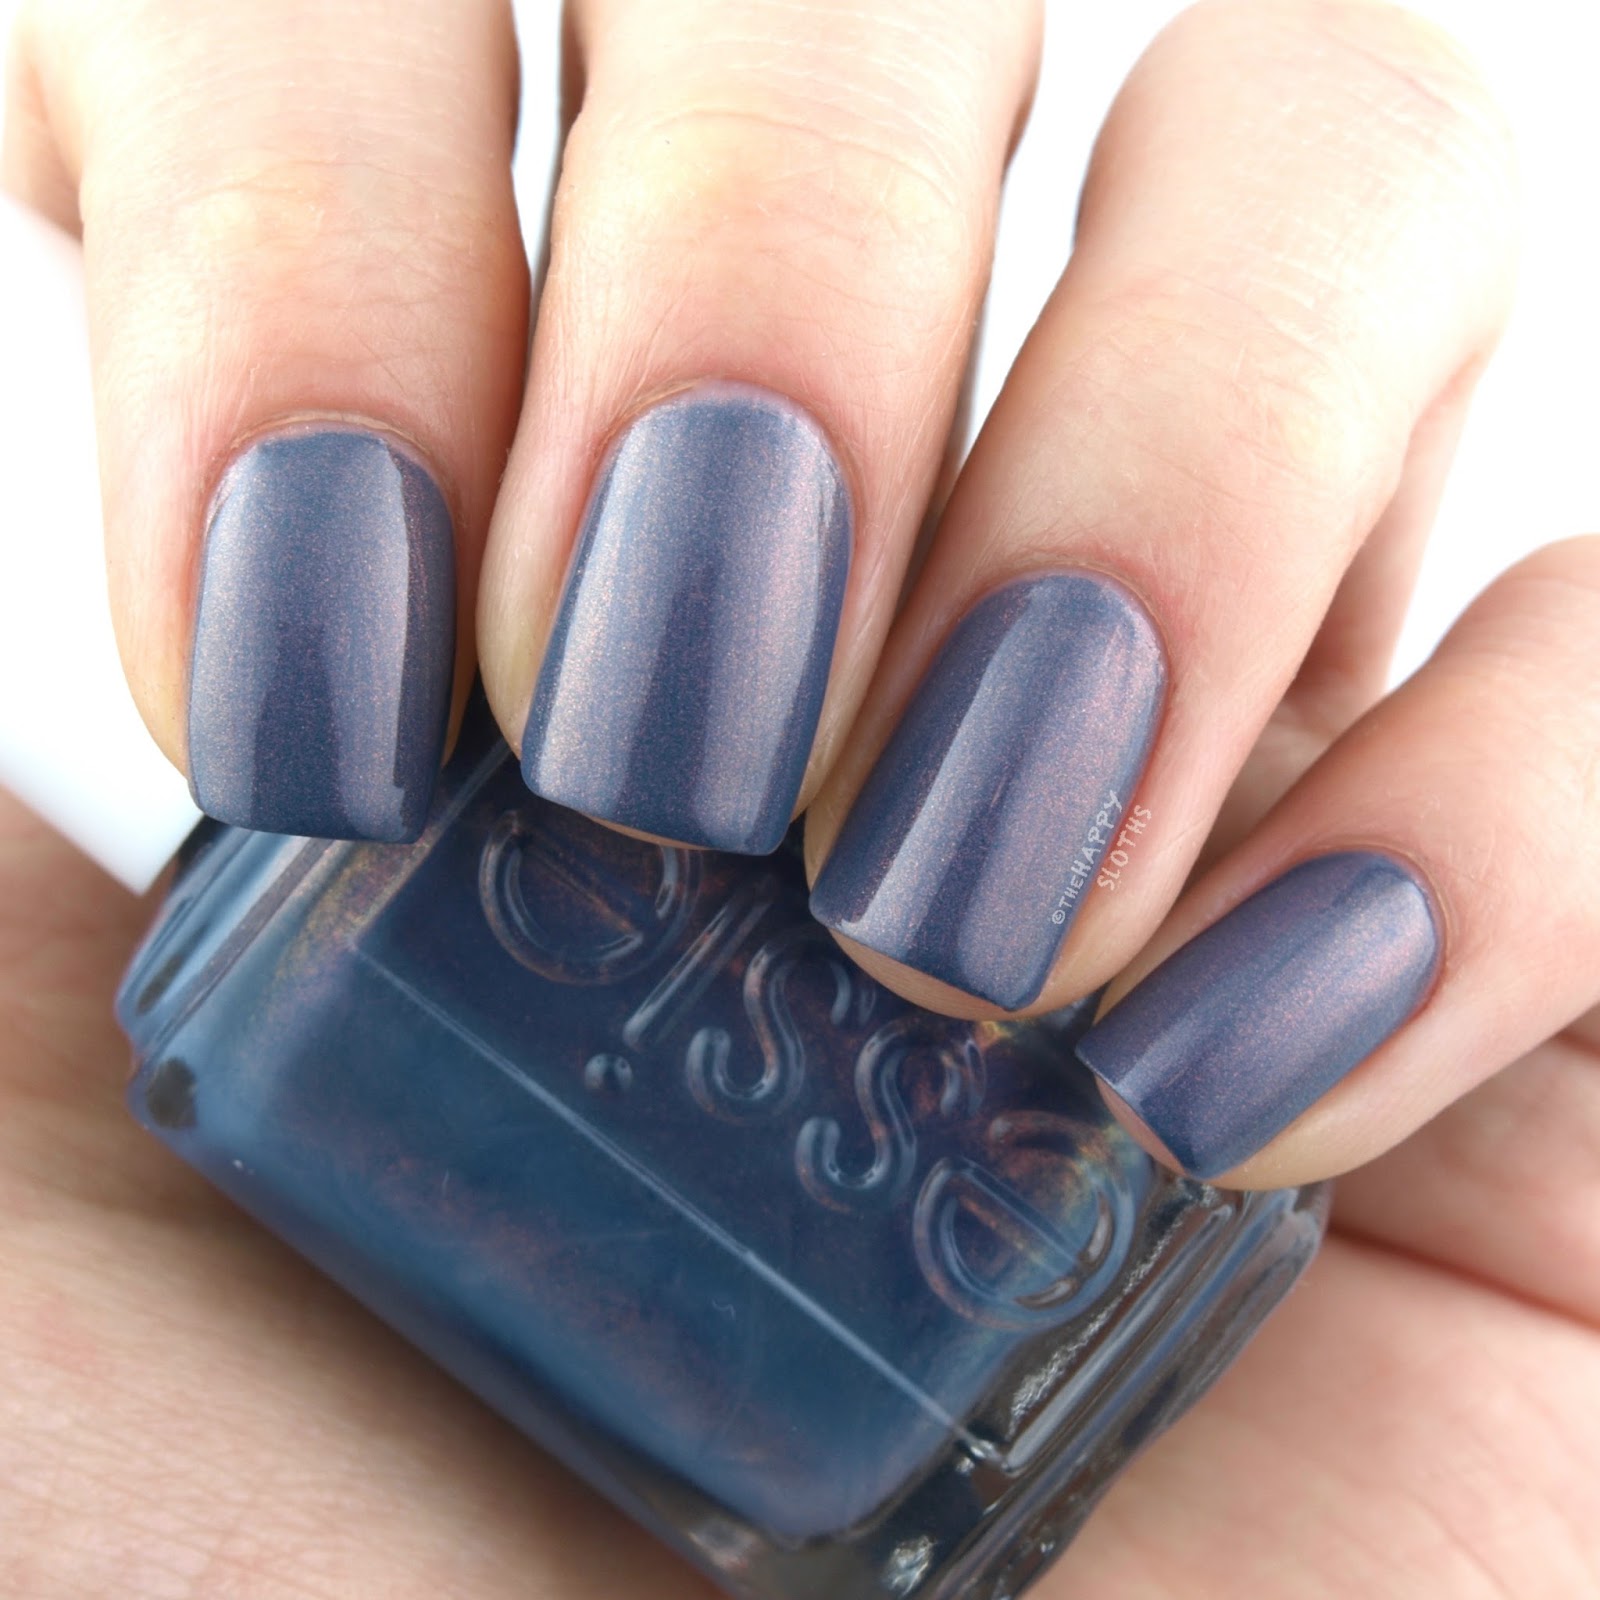 Essie | Desert Mirage Collection in "Blue-tiful Horizon": Review and Swatches